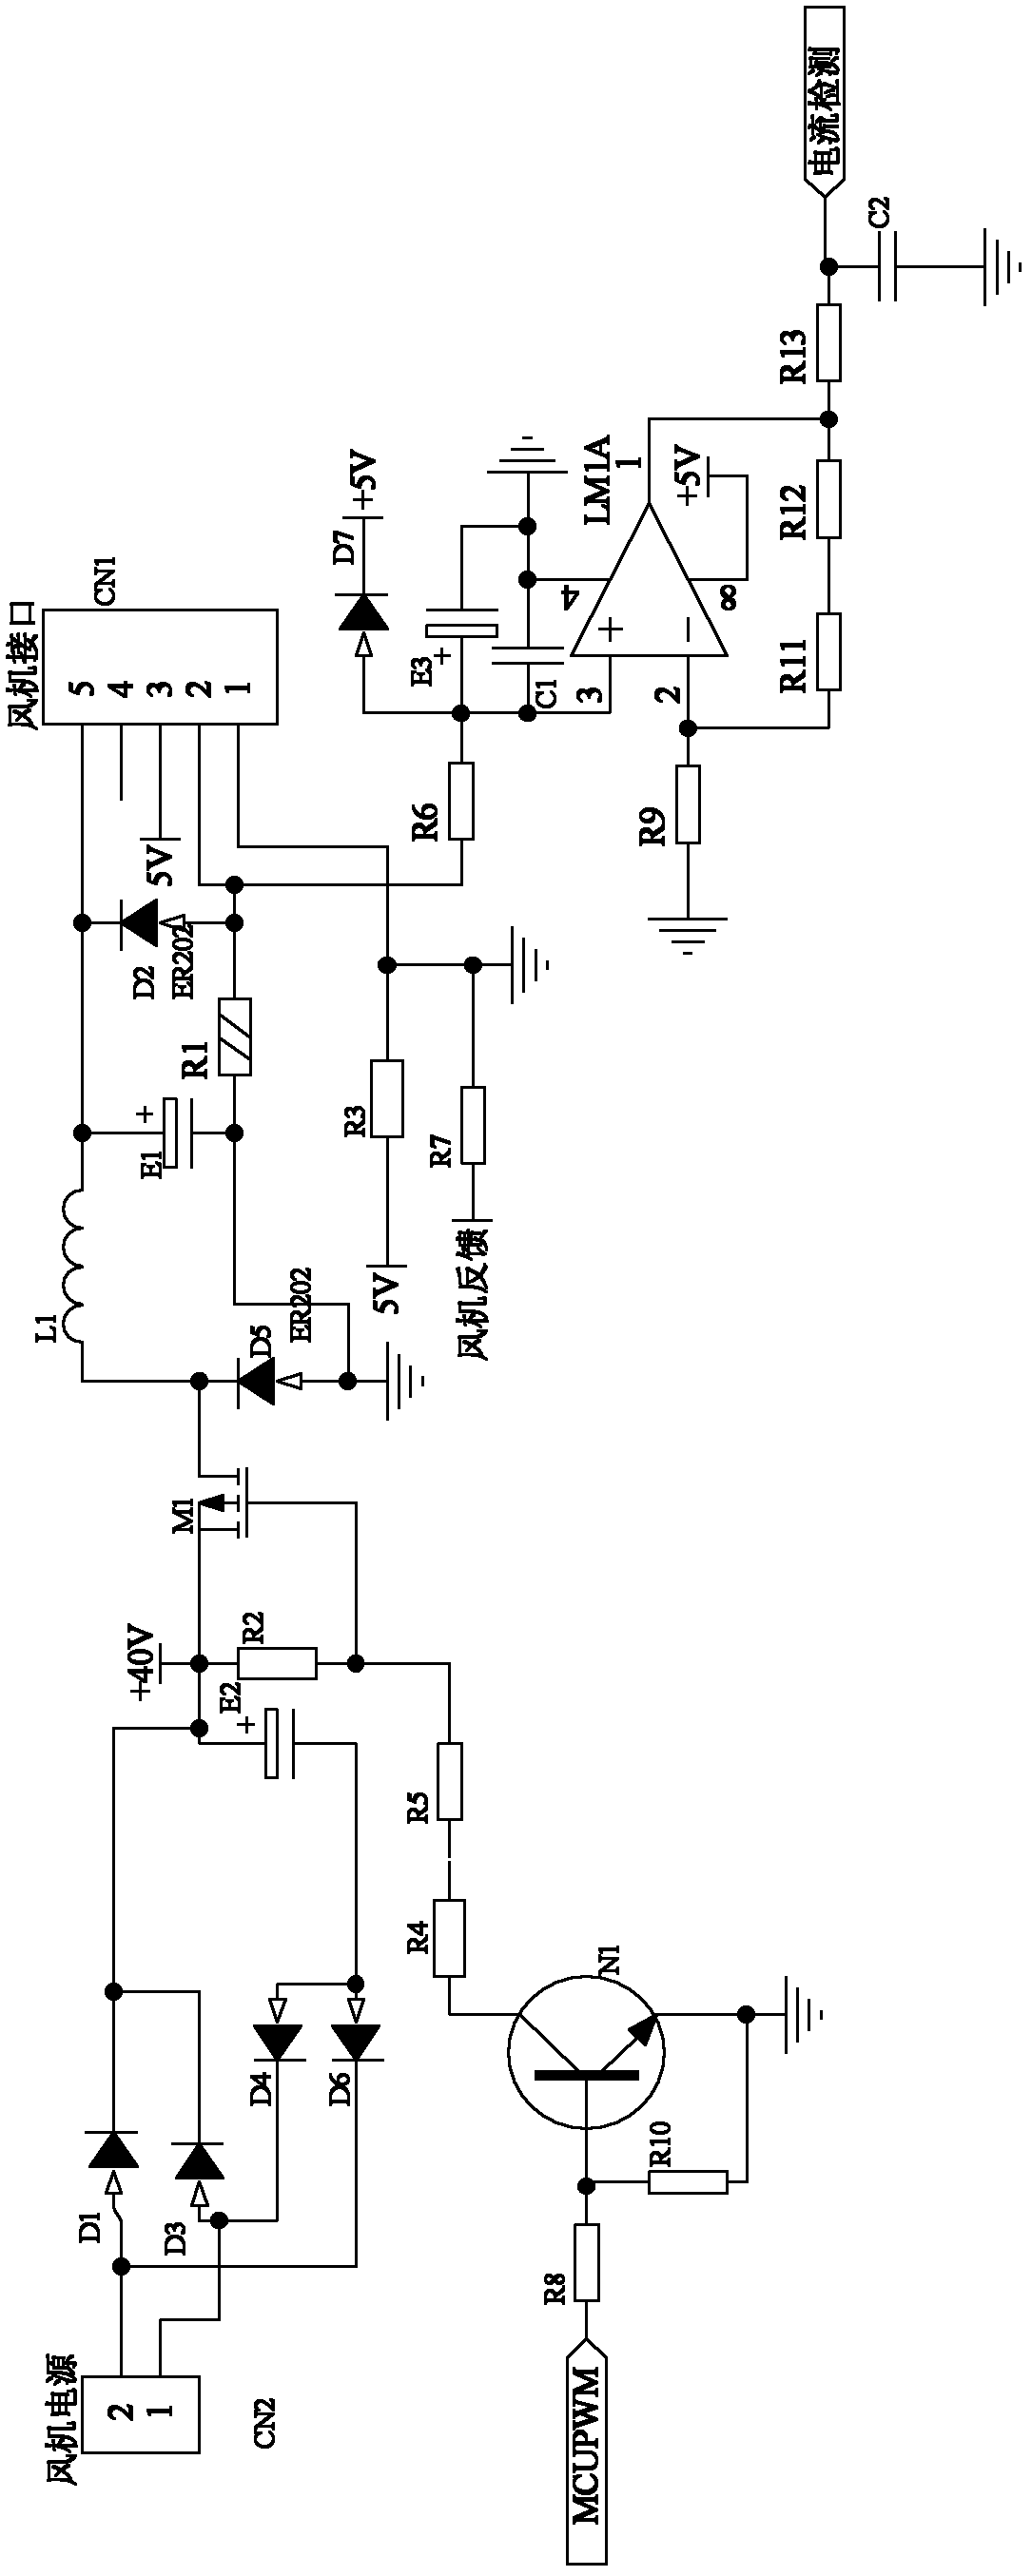 Fuel control method for fuel water heater